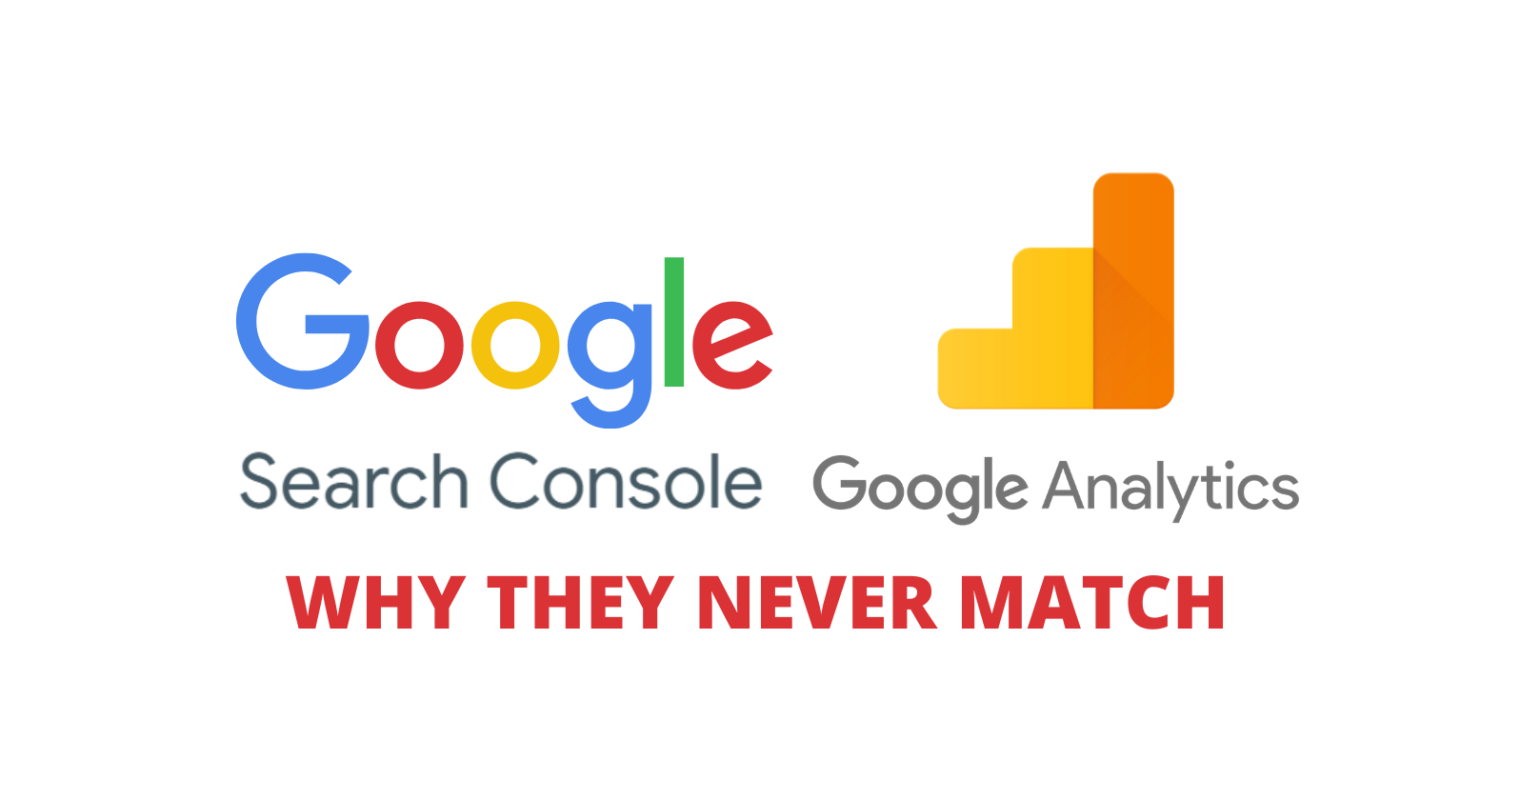 Why Google Search Console & Google Analytics Data Never Matches